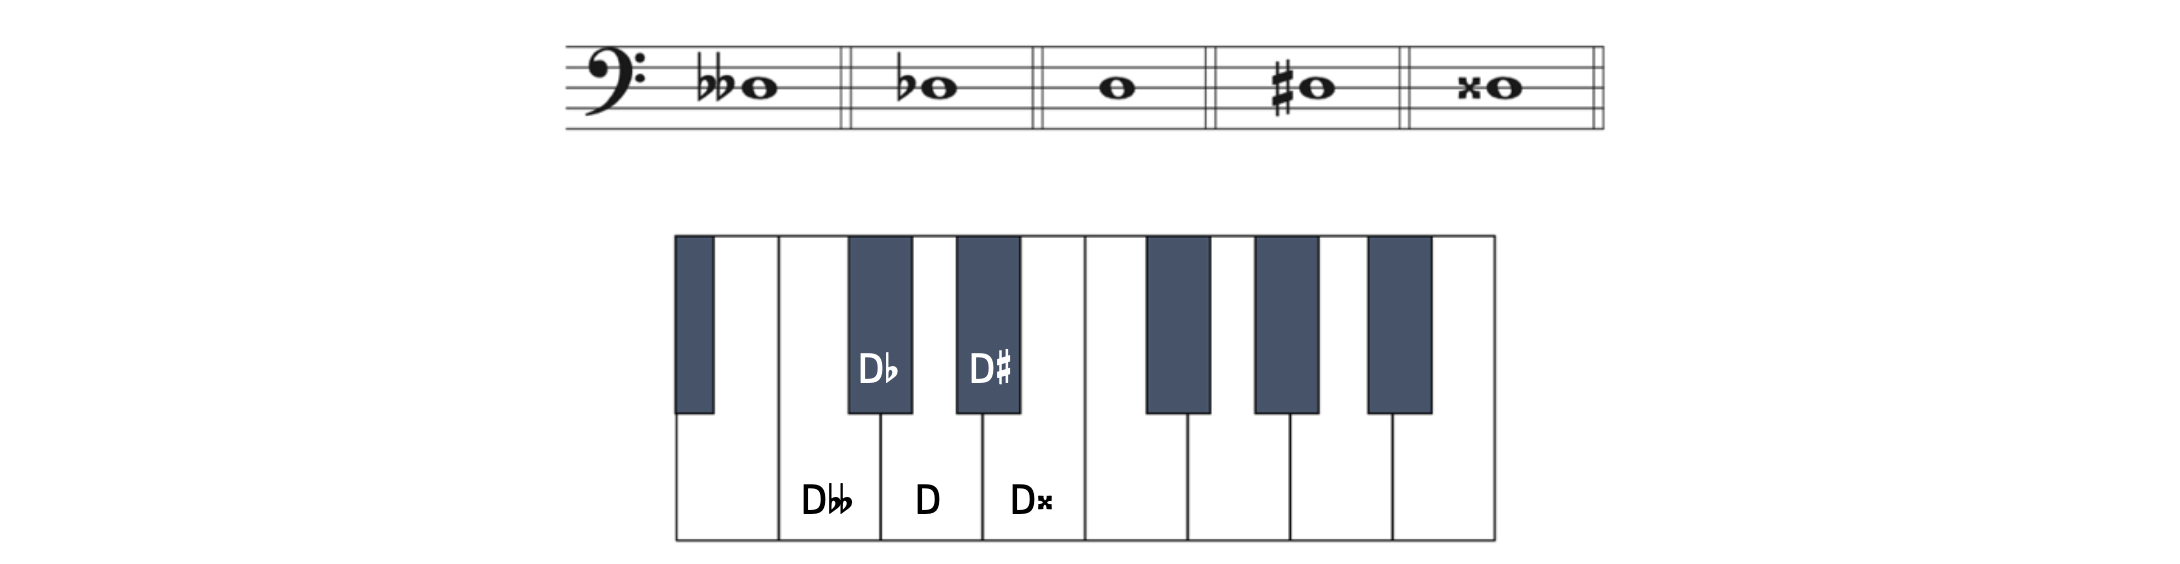 Example showing all accidentals on D and where they are on the keyboard. They include D-double flat which looks like C on the keyboard, D-flat which is the black key to the left of D, D, D-sharp which is the black key to the right of D, and D-double-sharp, which is the white key that looks like E.